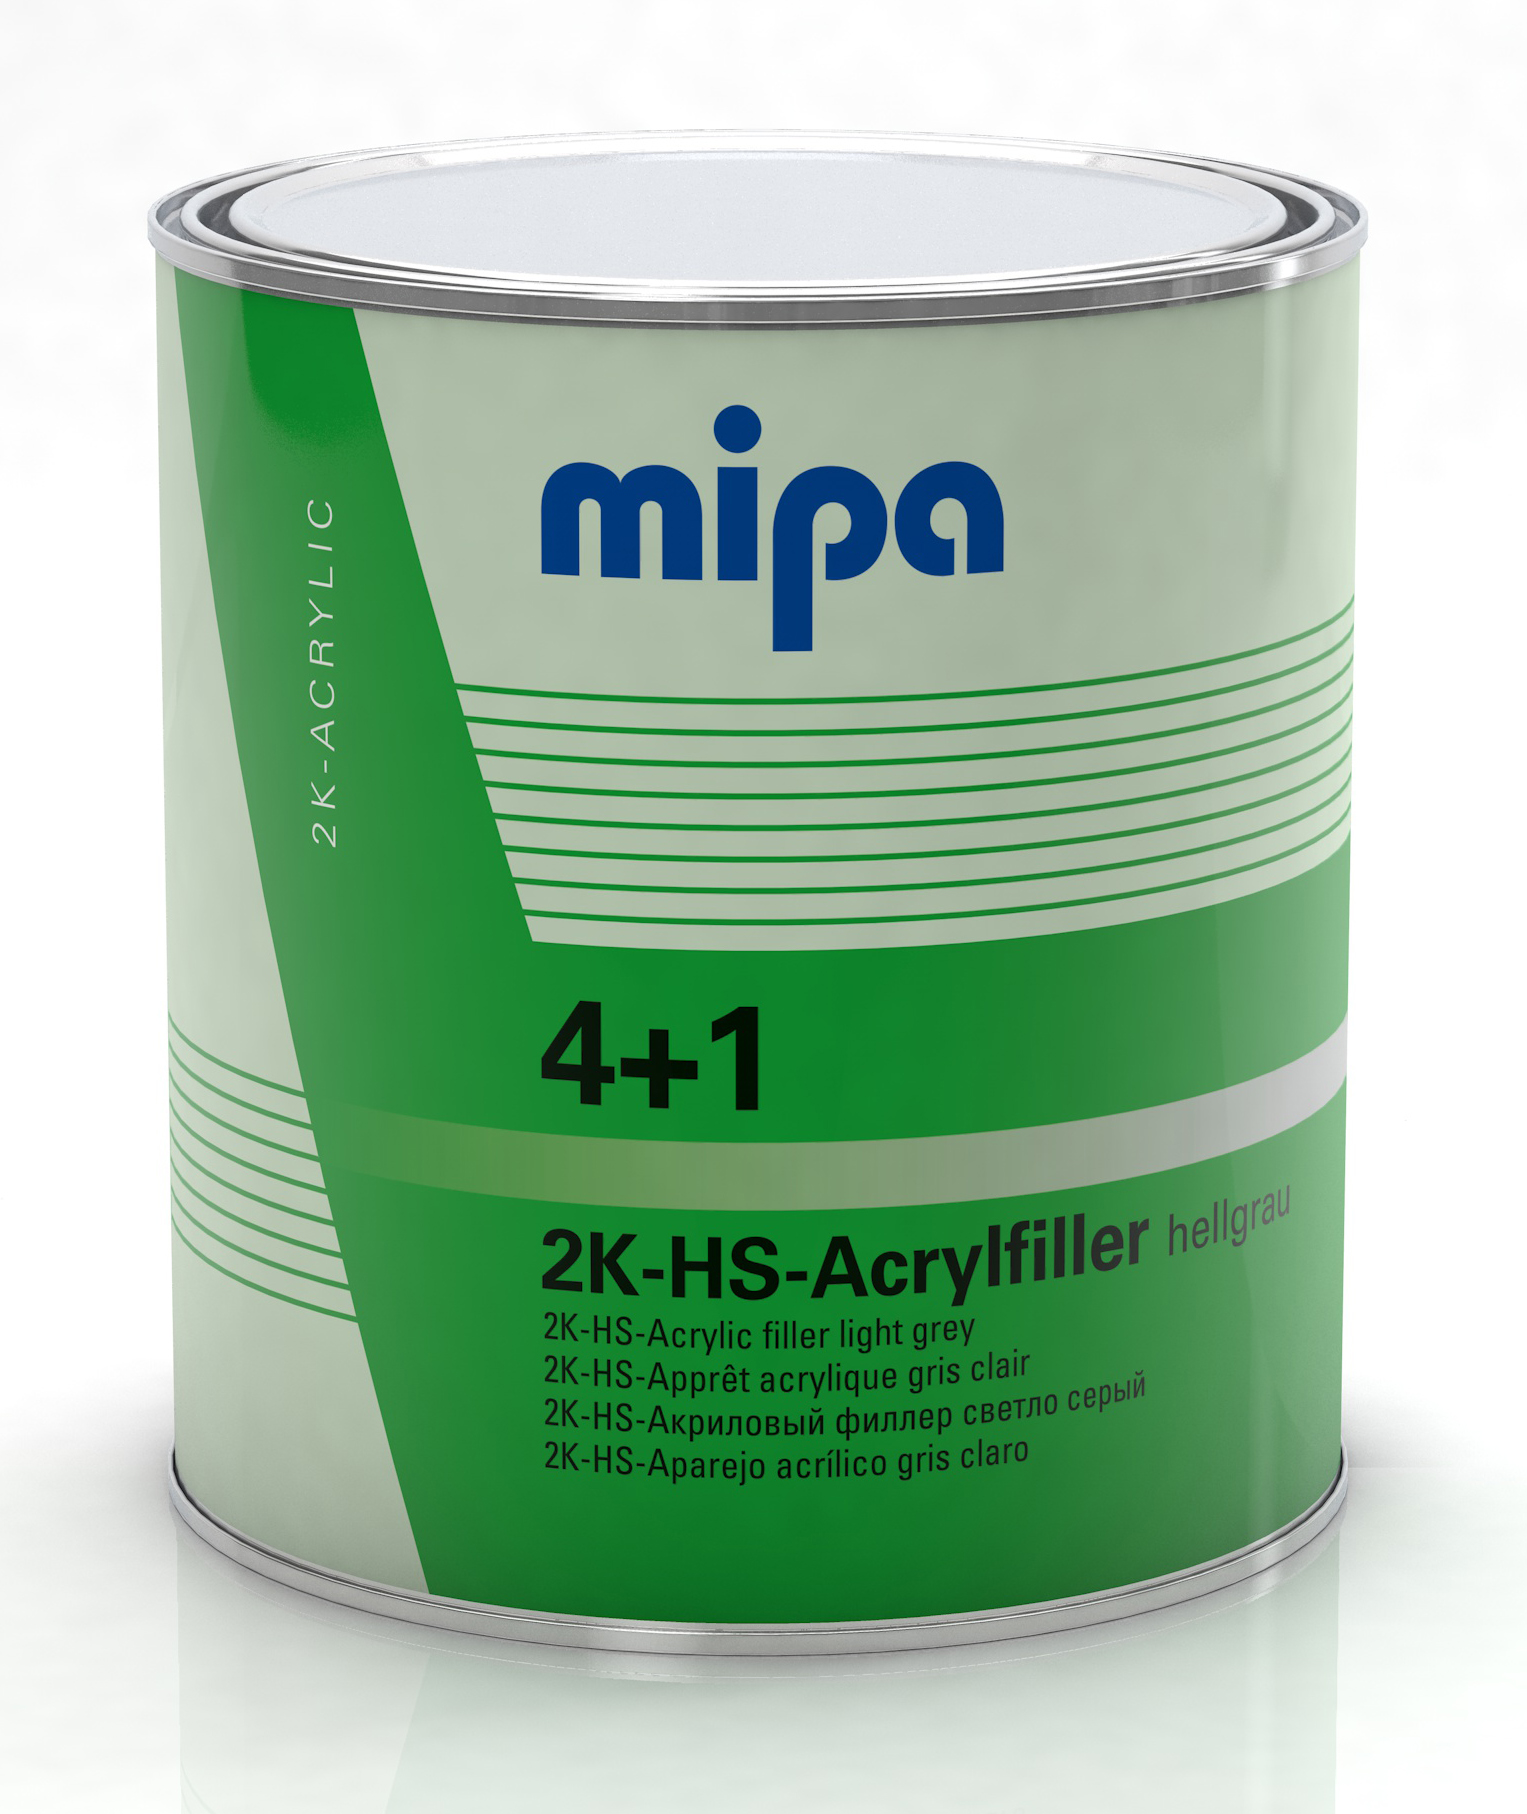 Mipa 4+1 Acrylfiller HS 3 l